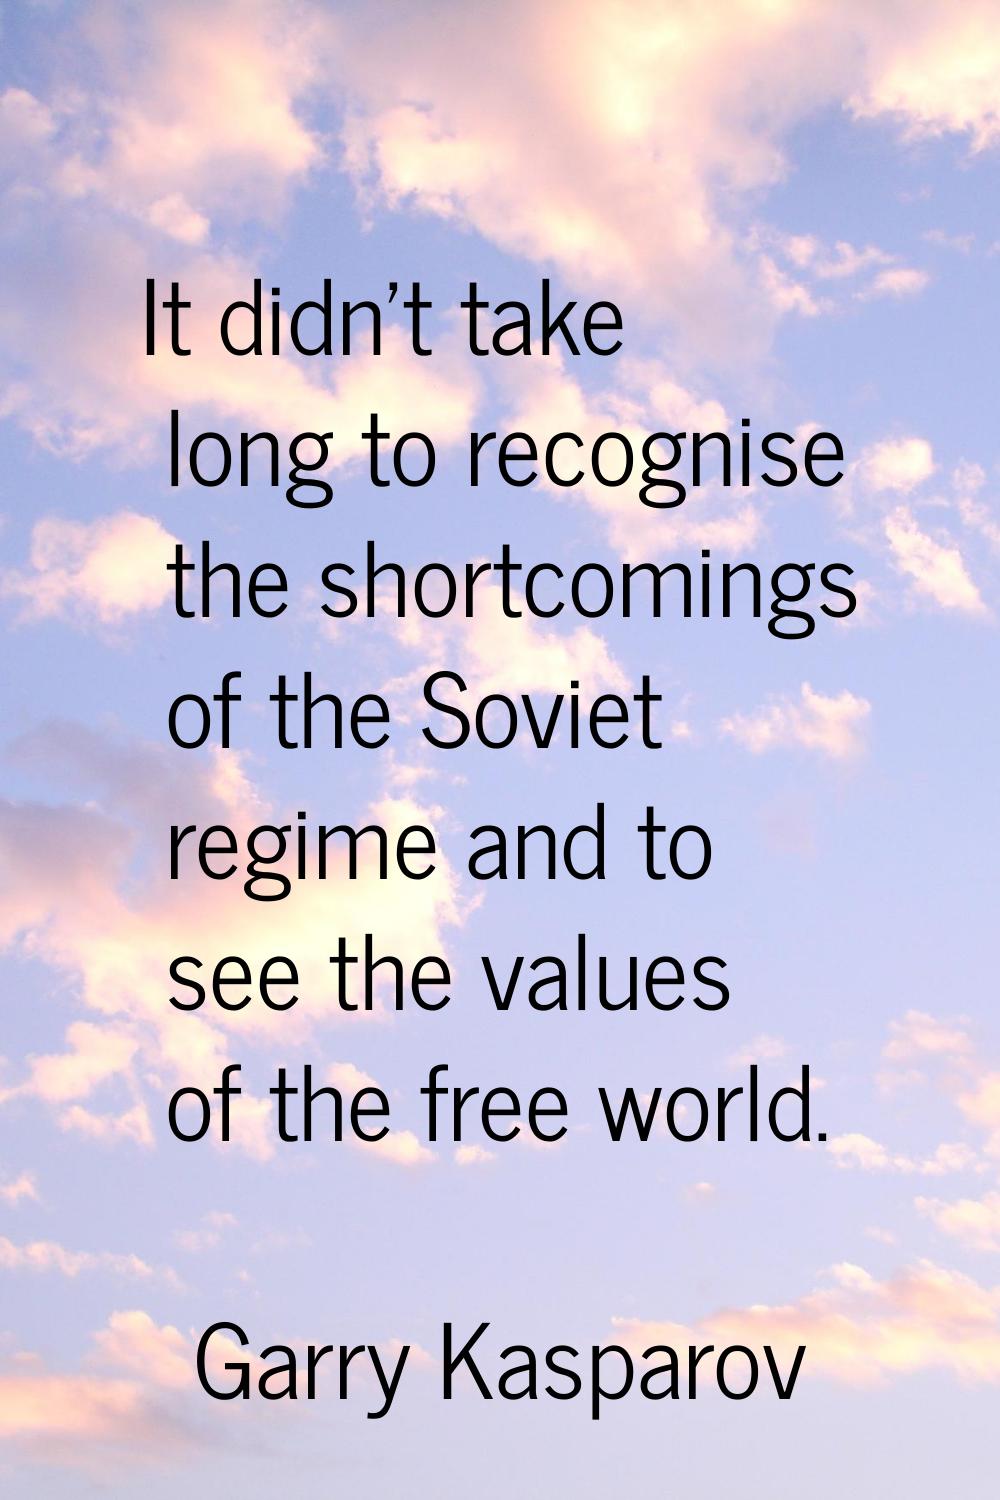 It didn't take long to recognise the shortcomings of the Soviet regime and to see the values of the